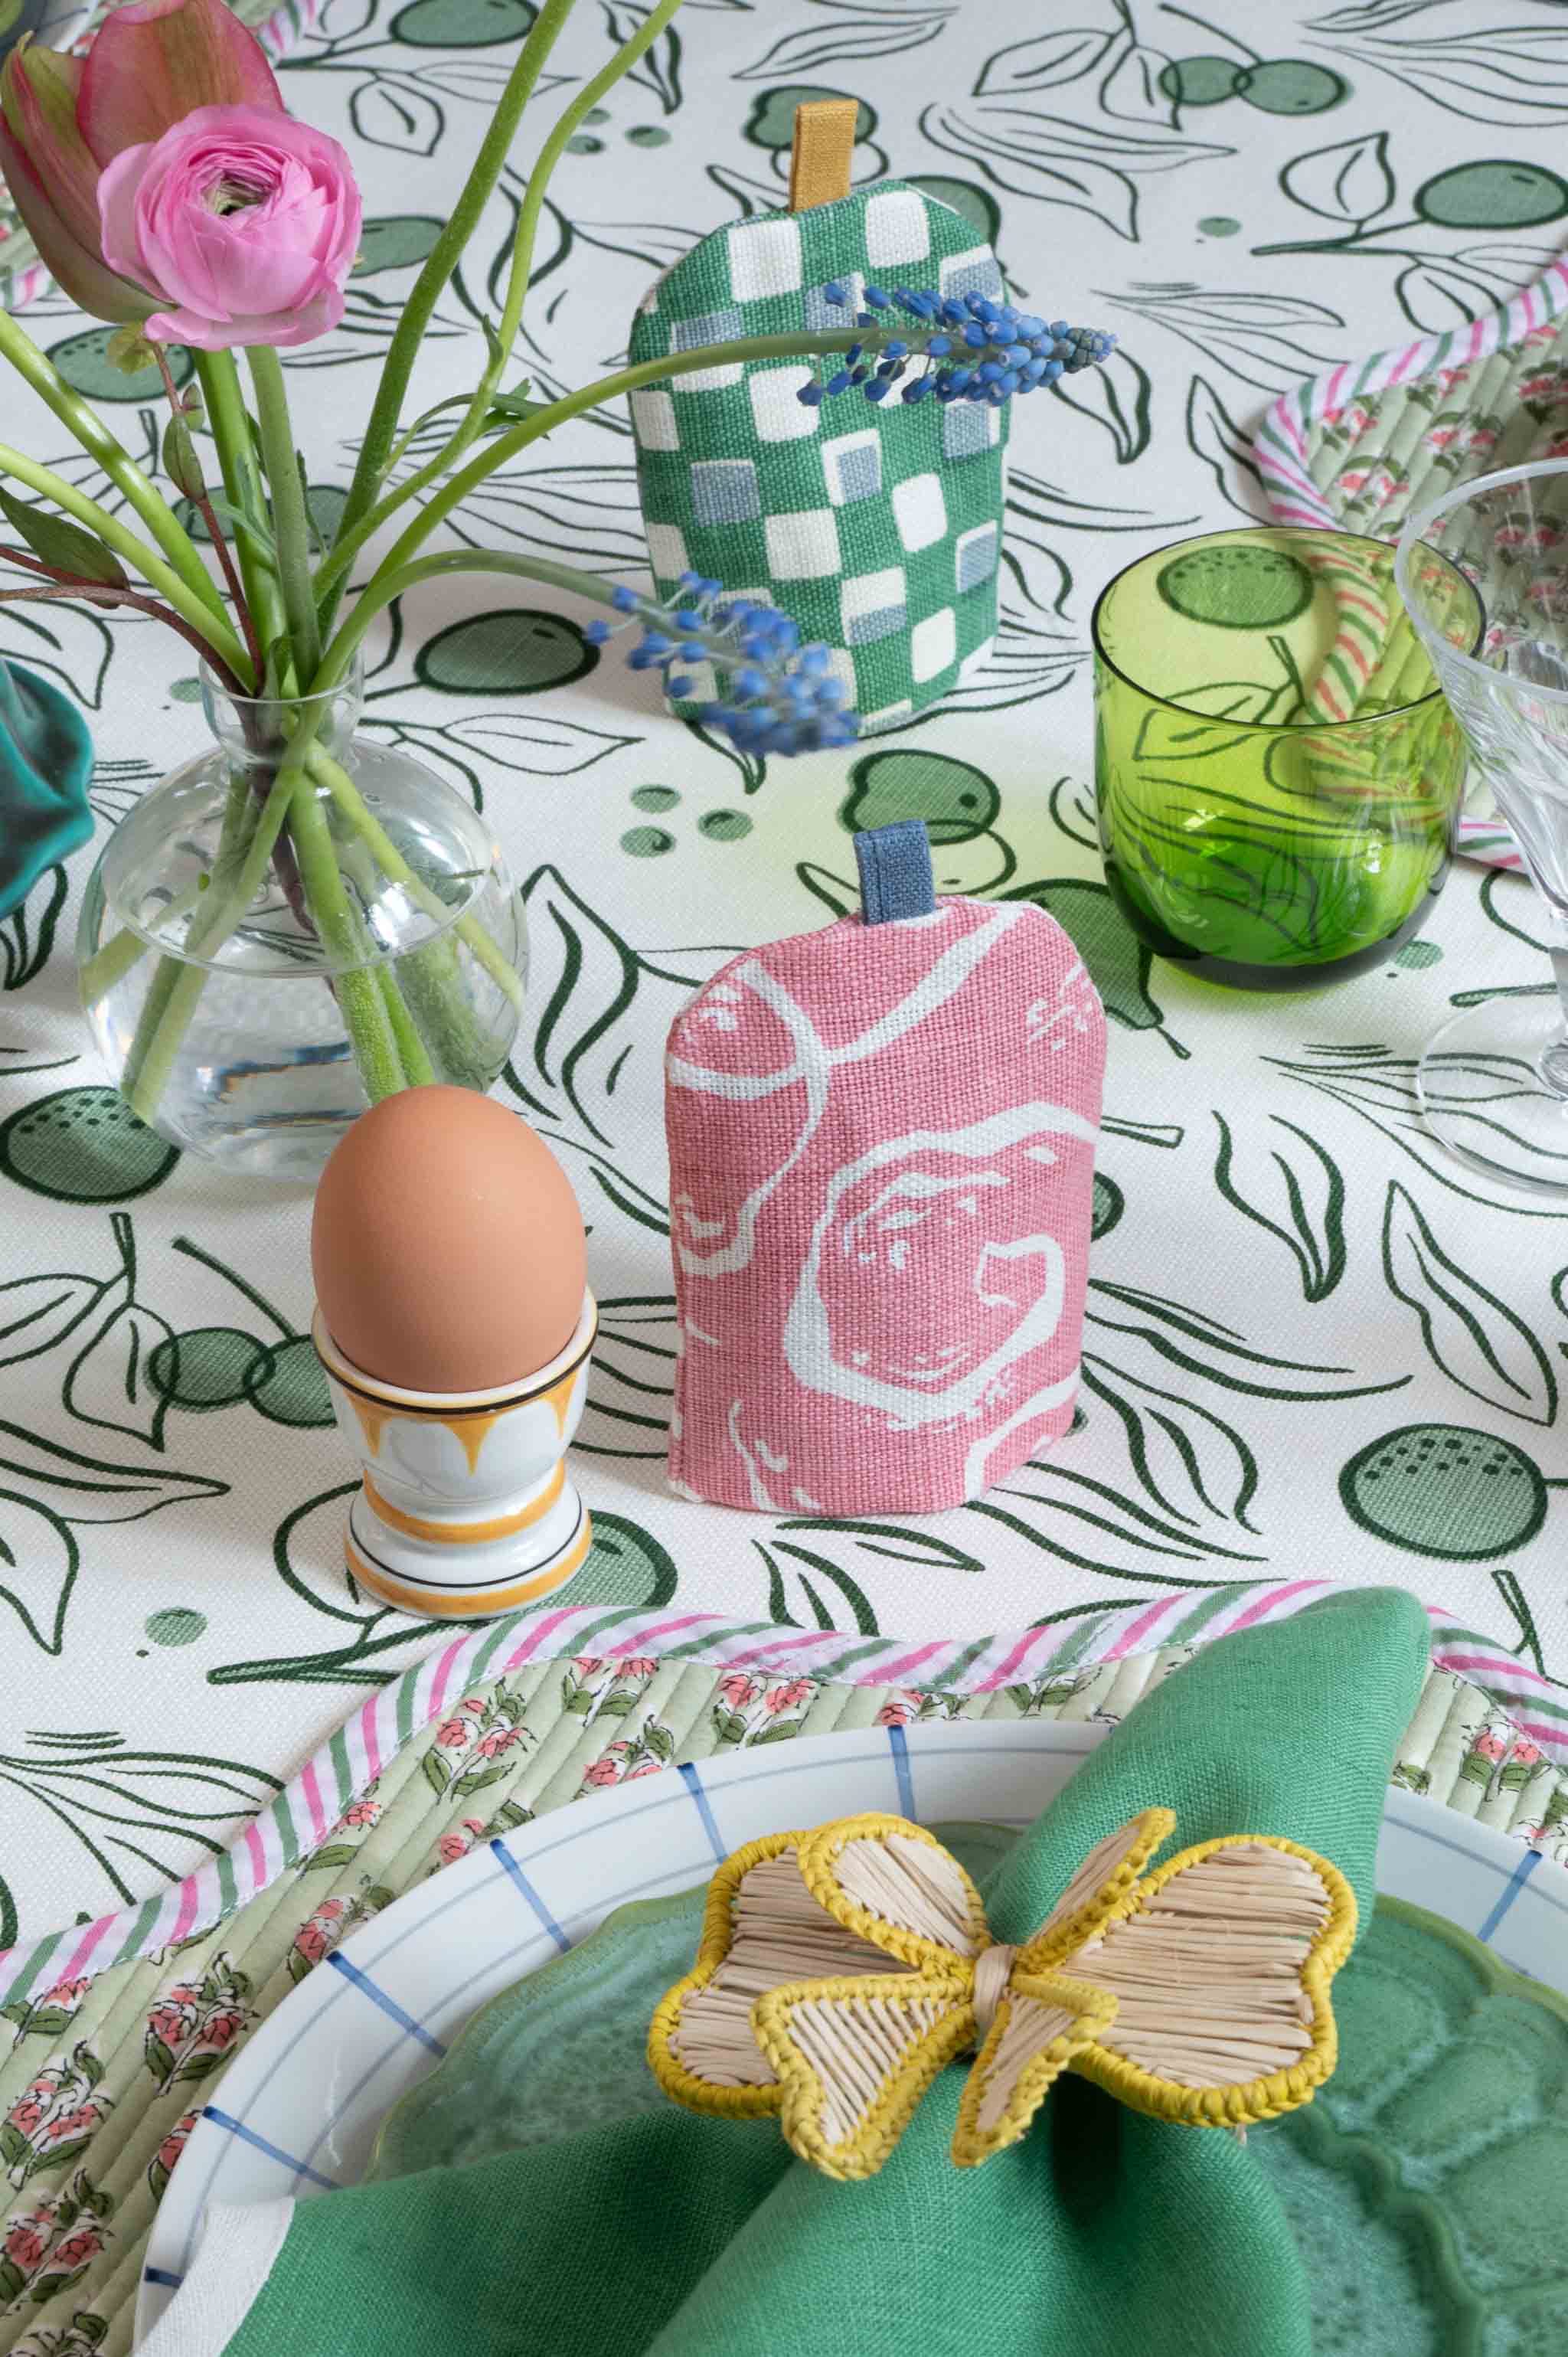 Make your own egg cozies for Easter!